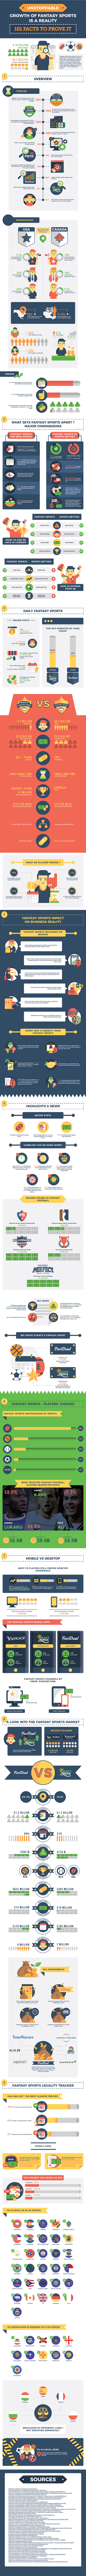 The Unstoppable Growth of Fantasy Sports [Infographic]